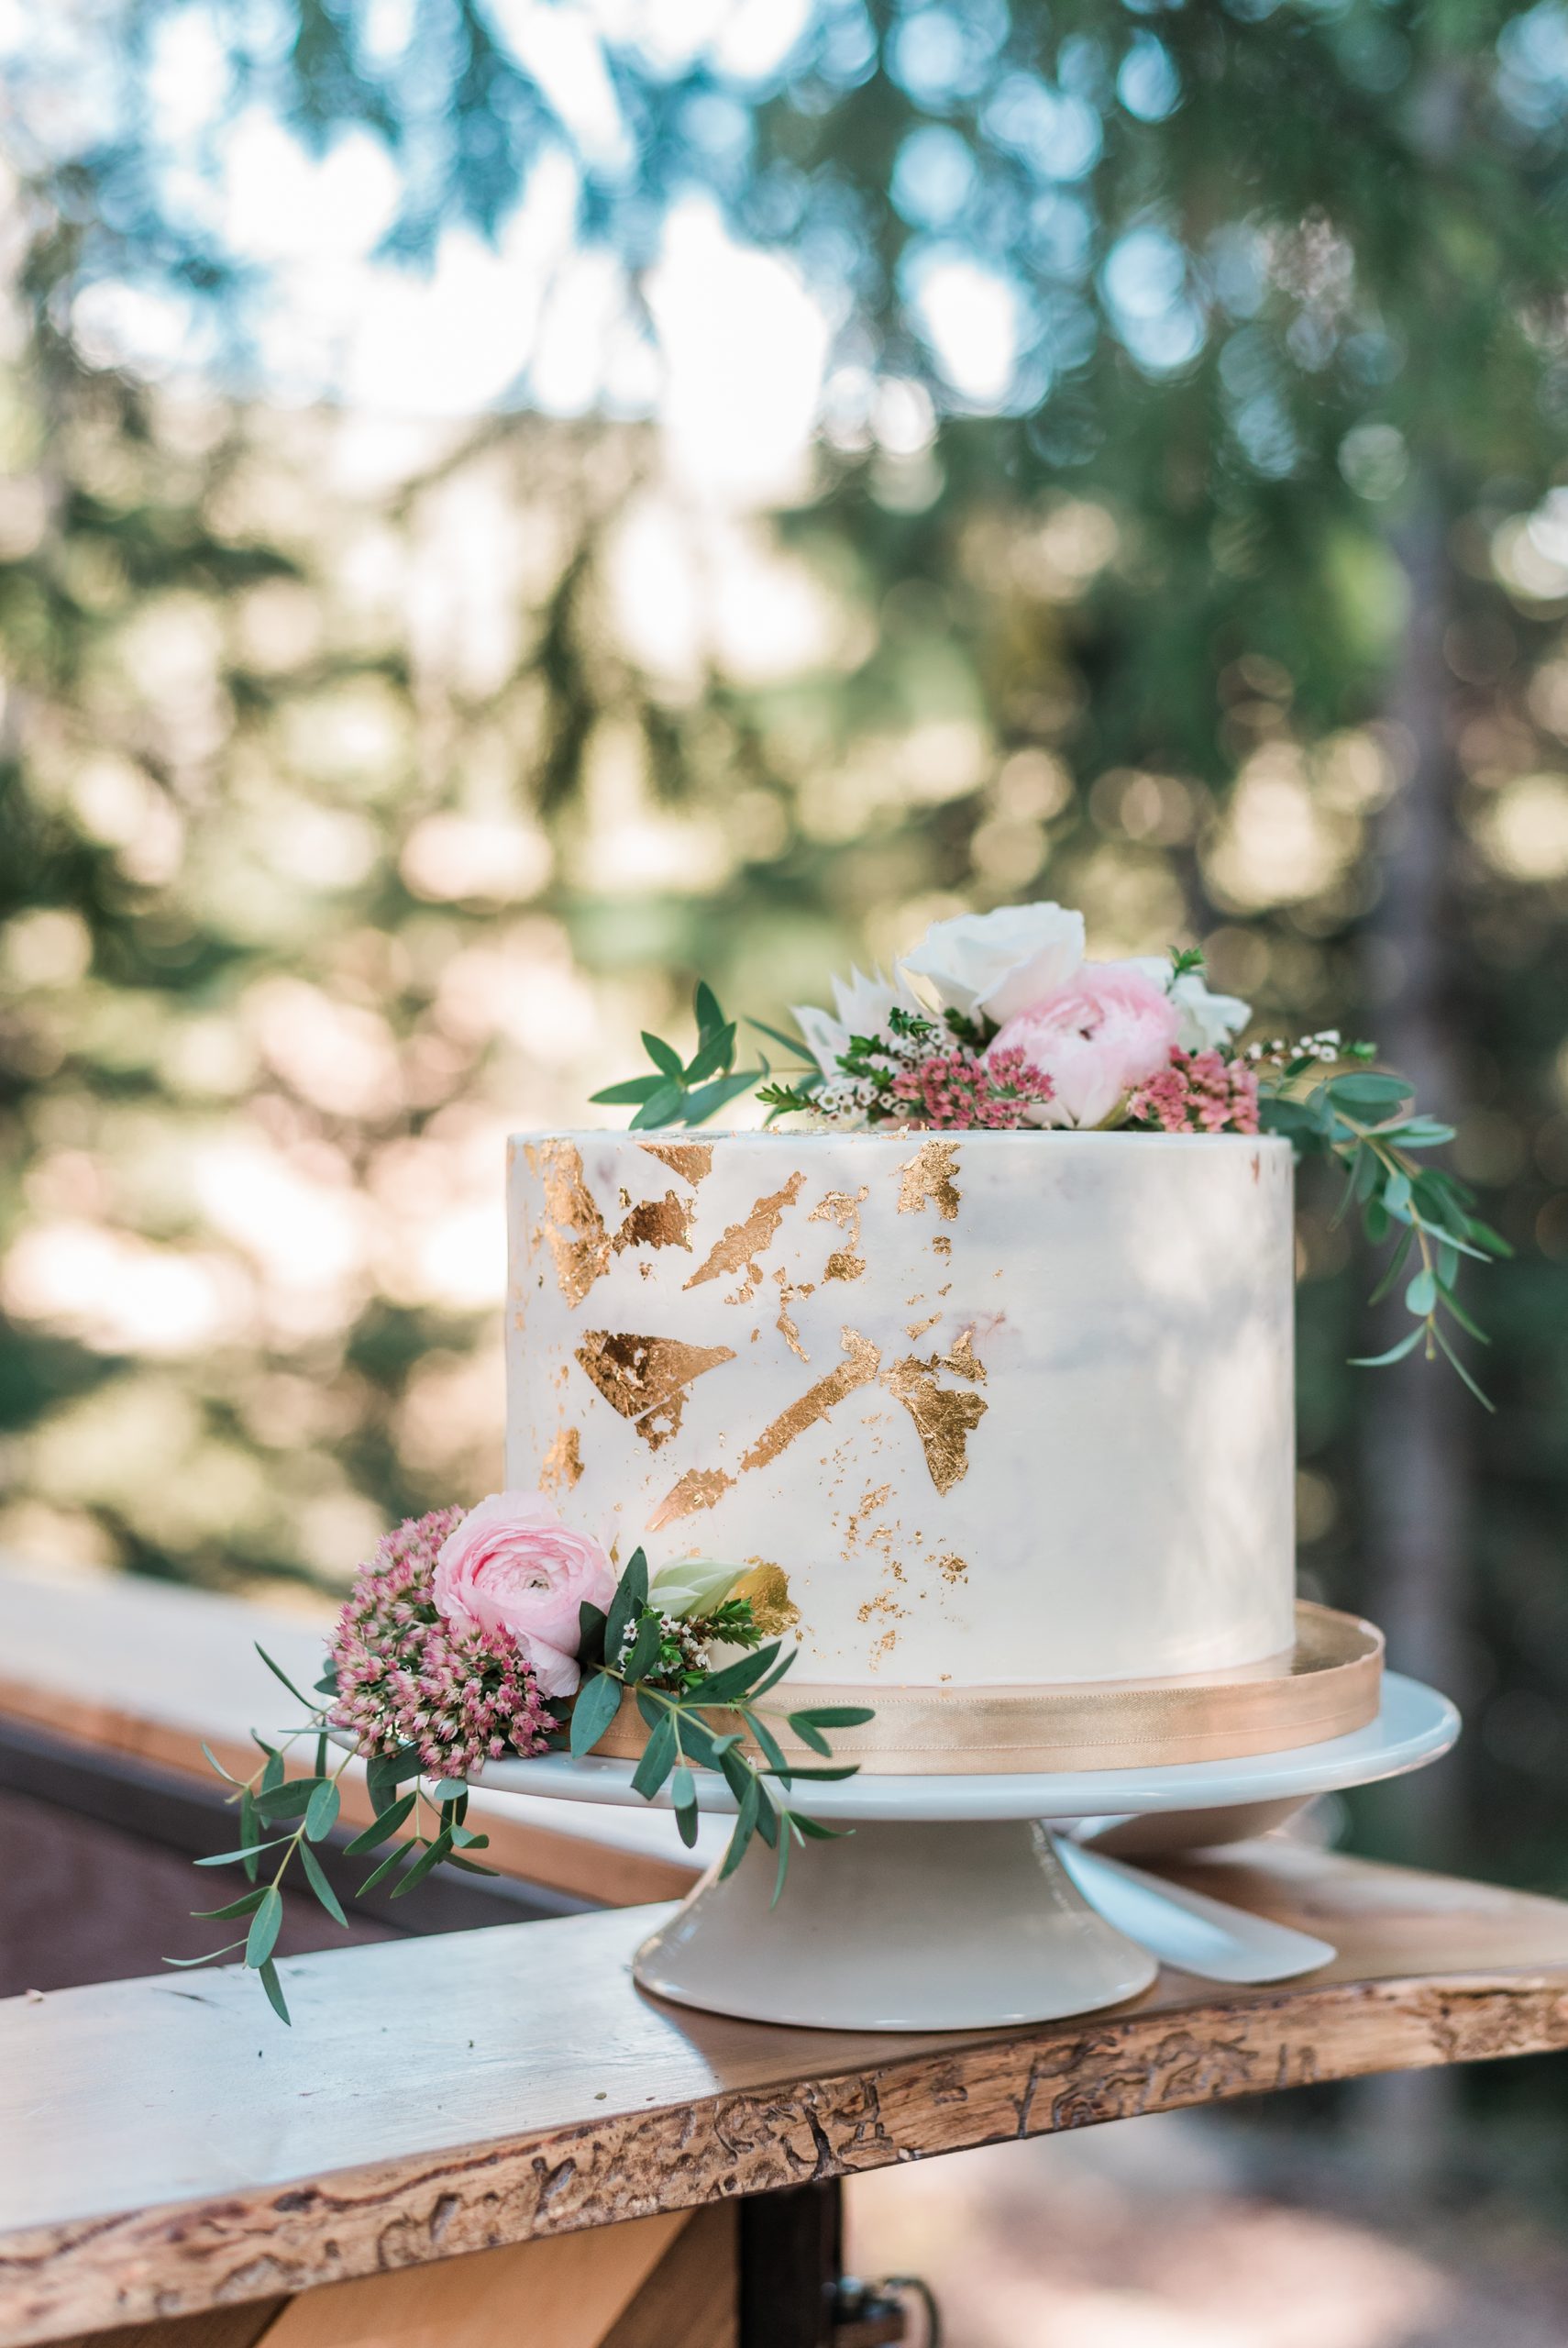 White cake with gold foil